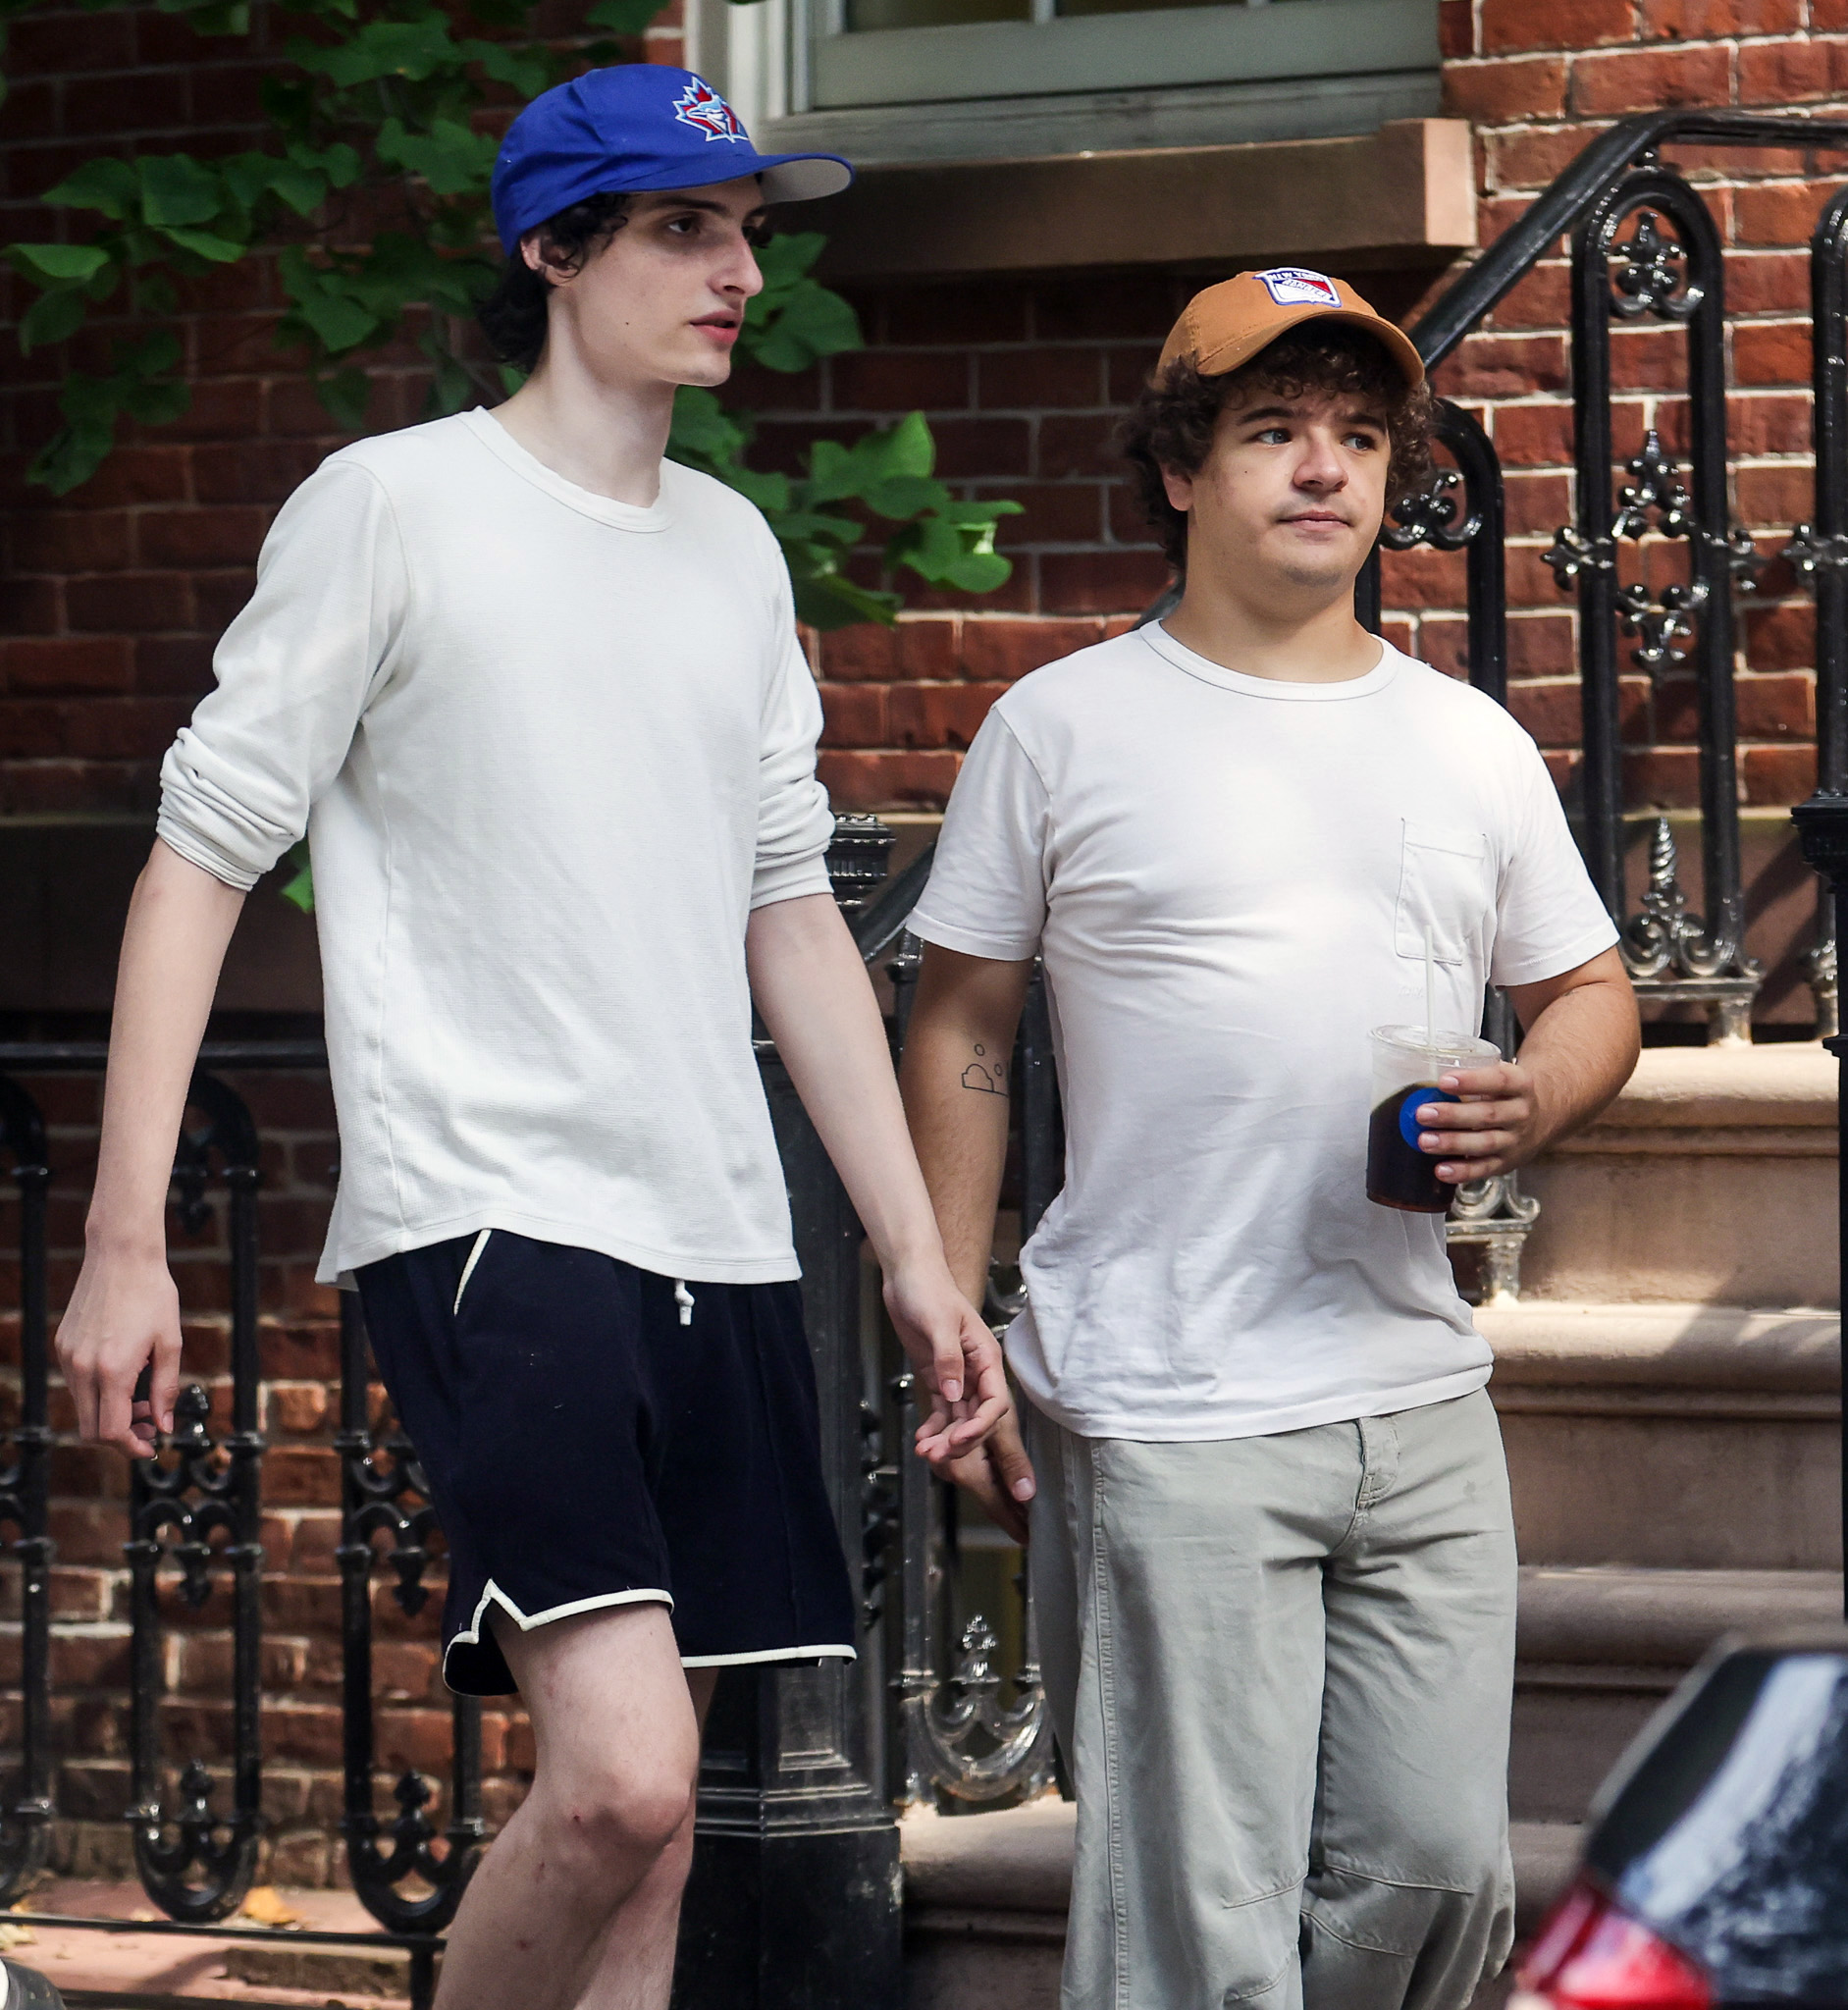 Finn Wolfhard and Gaten Matarazzo looked for property as they are on a filming break from Stranger Things 5